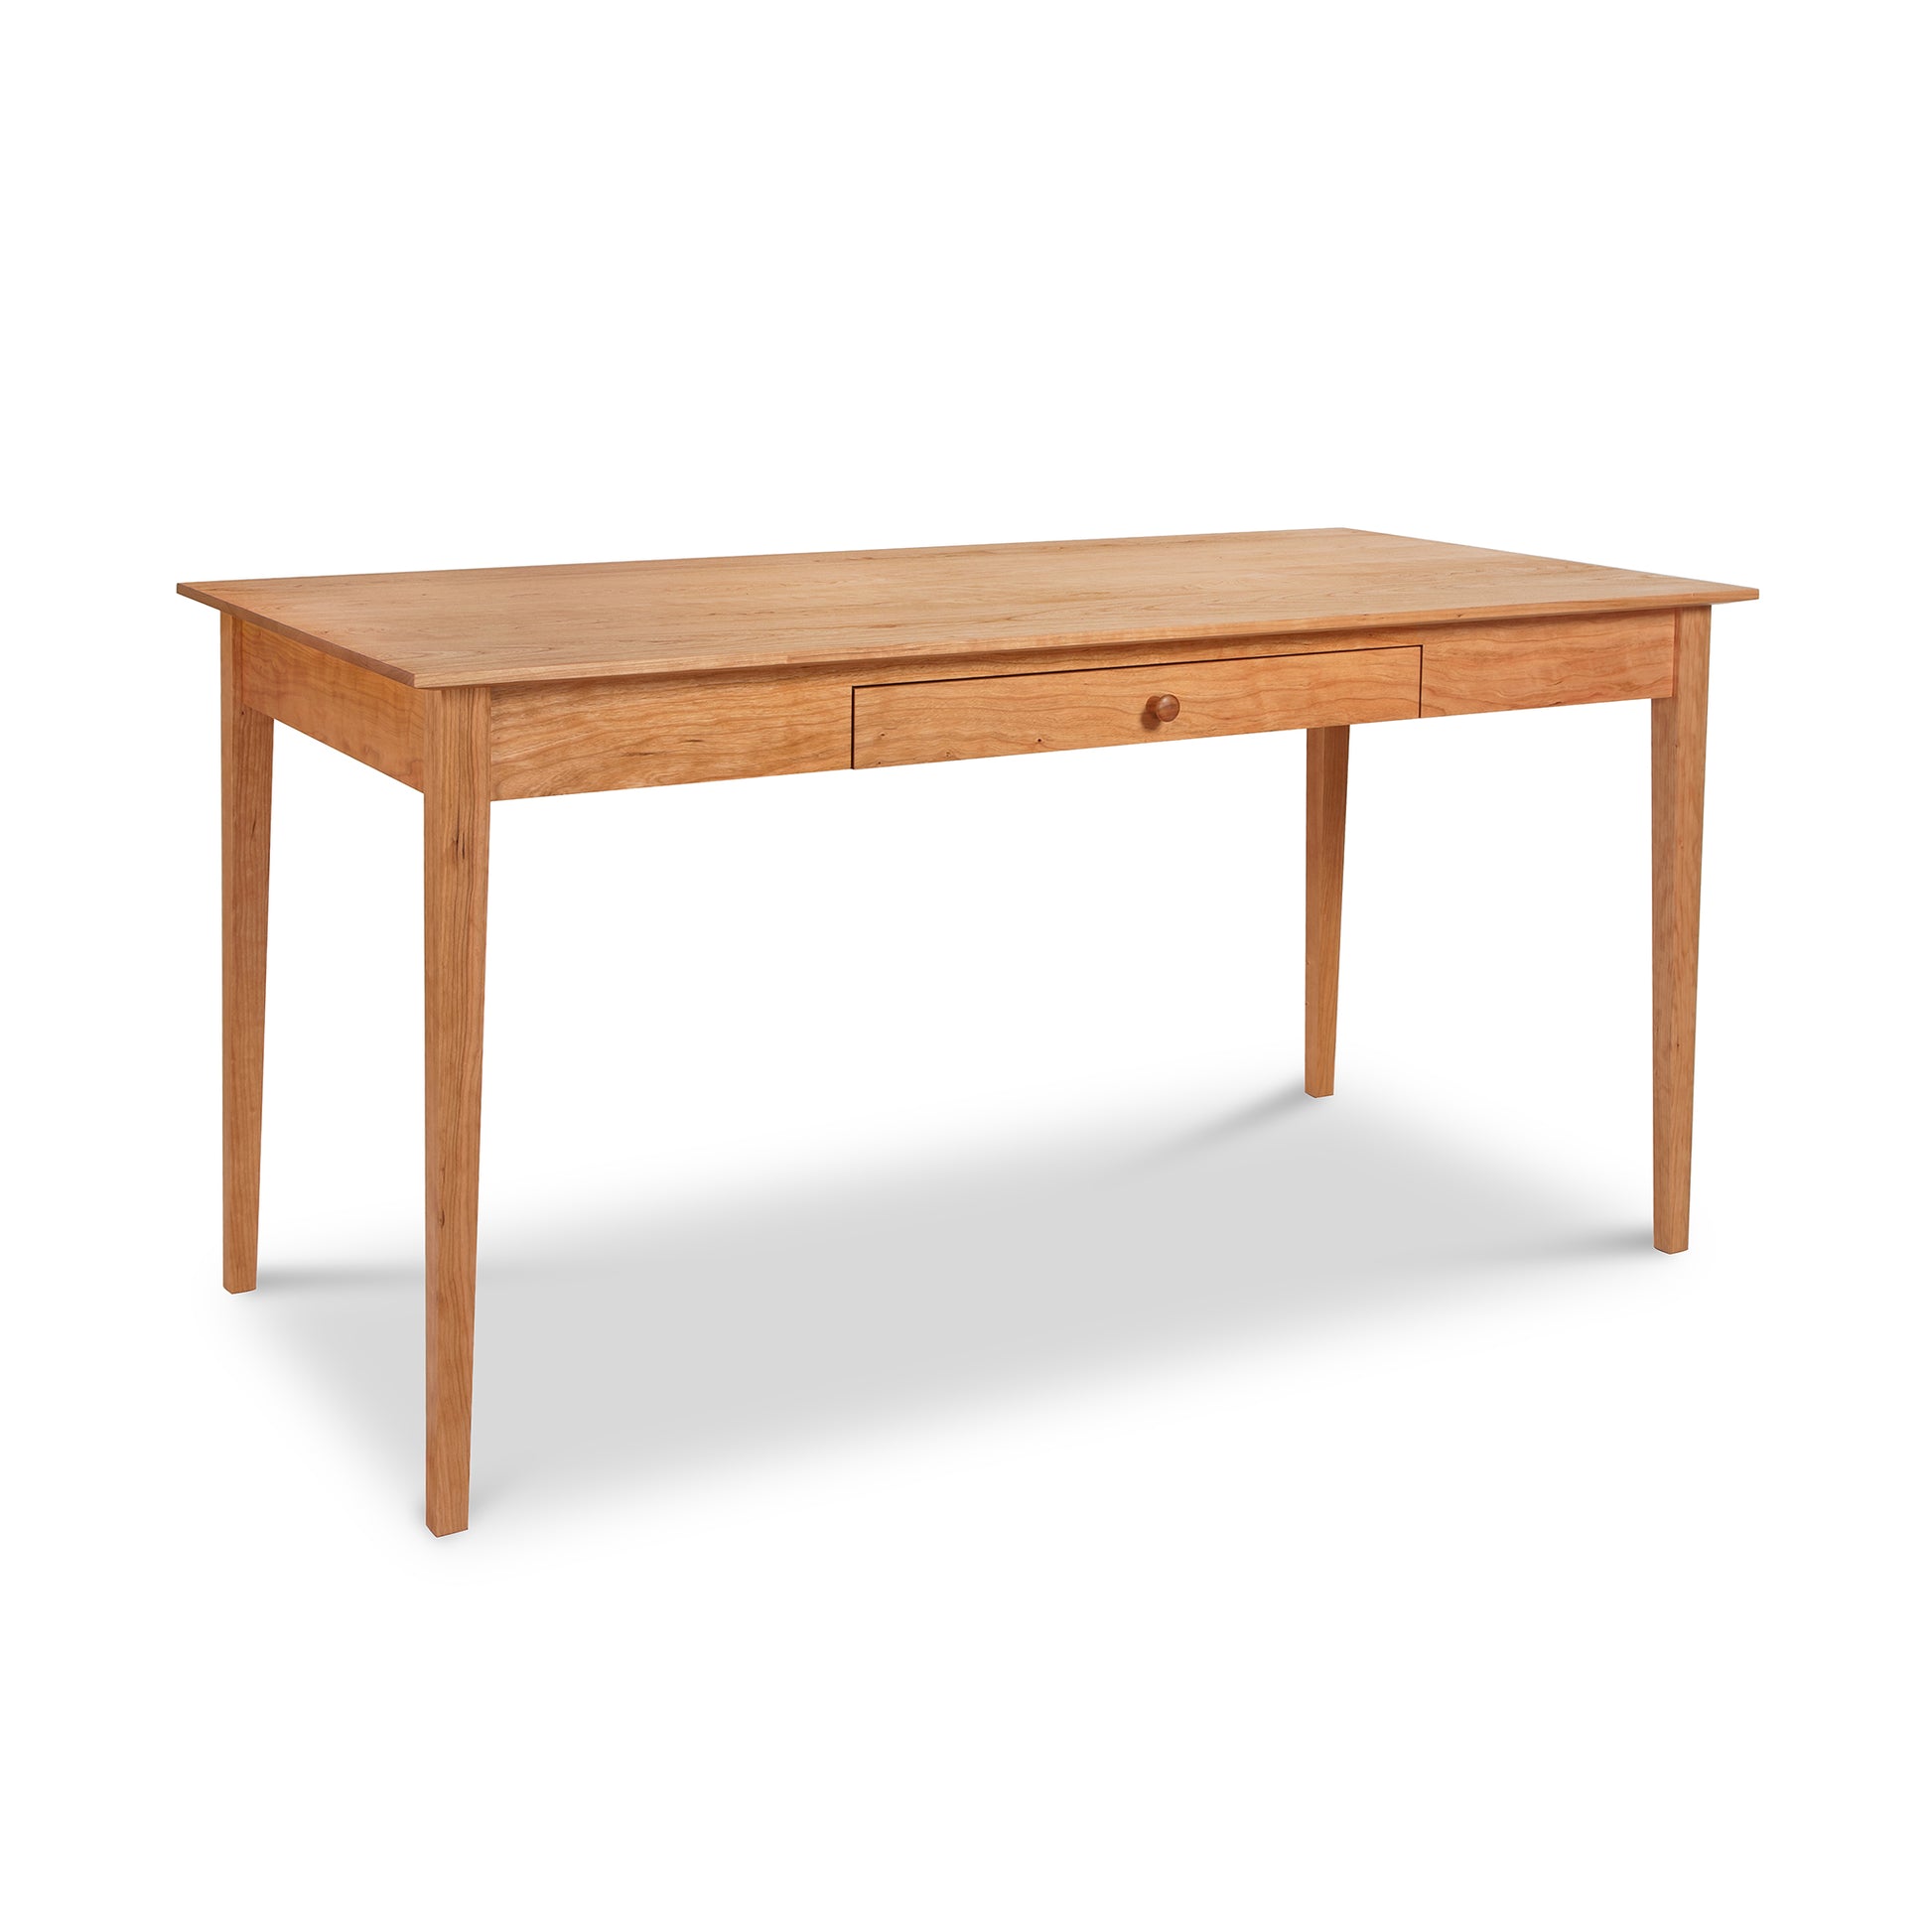 An American Shaker Writing Desk crafted by Maple Corner Woodworks craftsmen from sustainably harvested hardwood, featuring a simple wooden table with a single drawer, isolated on a white background.